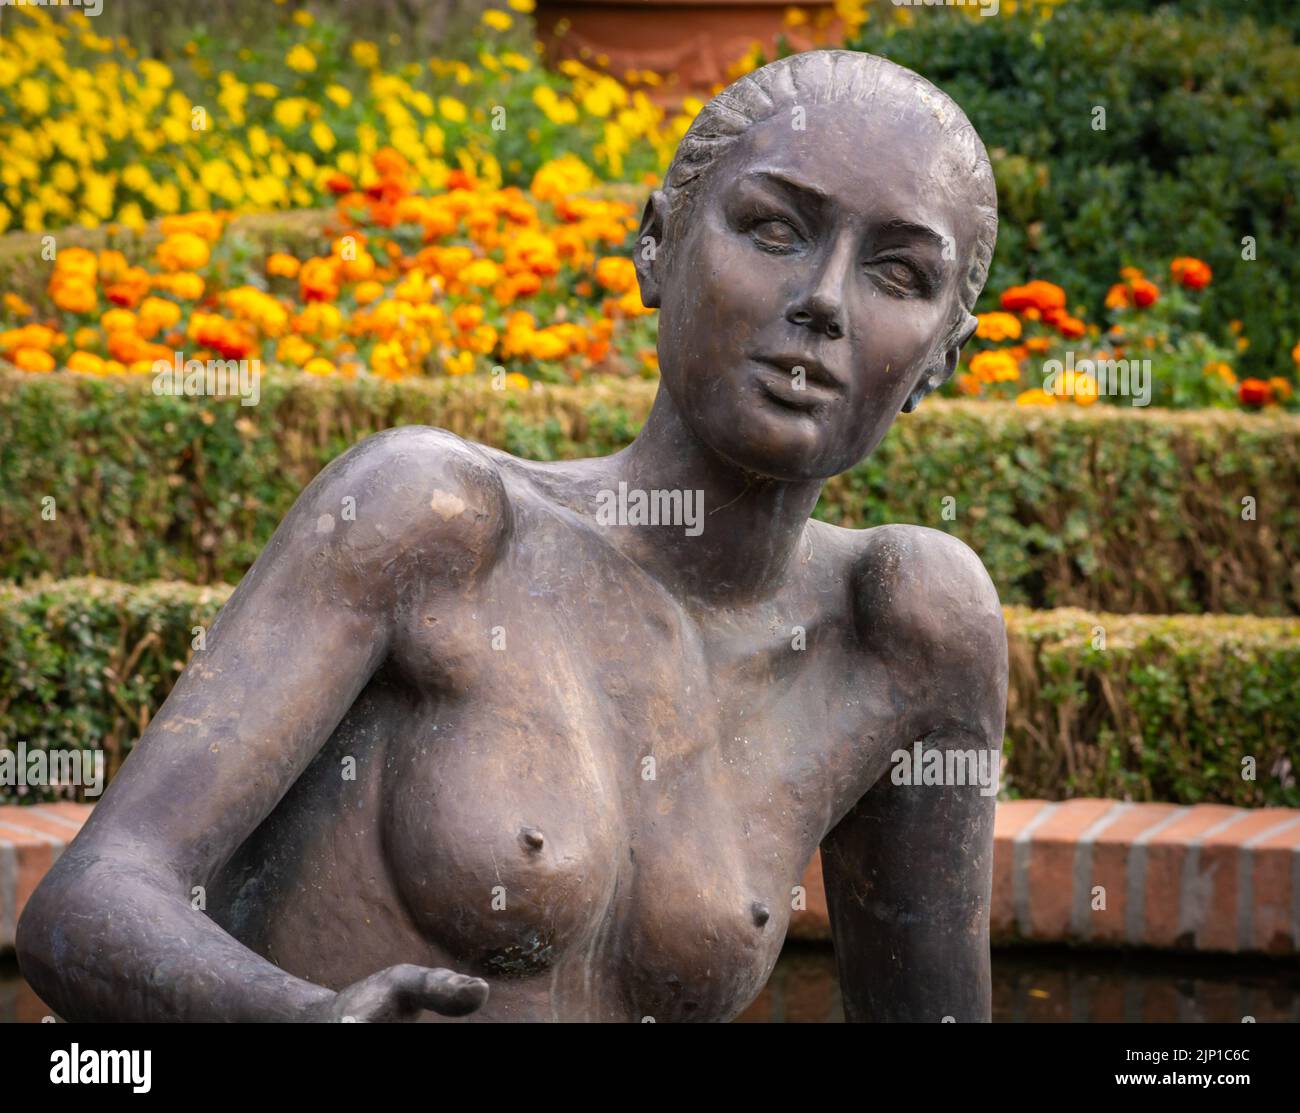 bronze sculpture of the nymph at the Trauttmansdorff gardens of Merano - South Tyrol, northern Italy Stock Photo